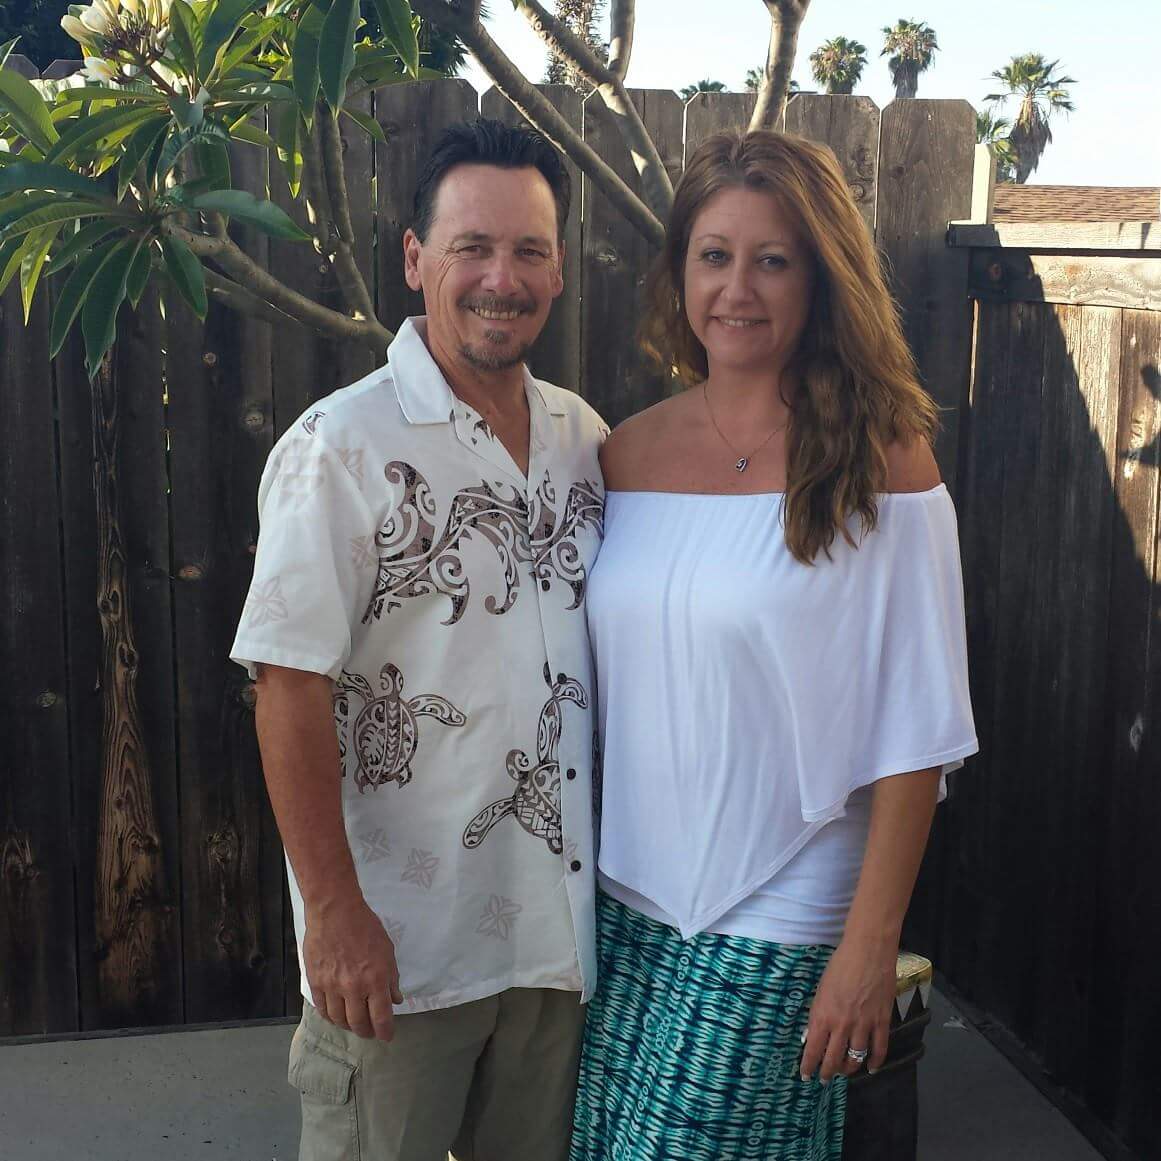 Greg and Stacey Holmes are bringing their aloha experiences to Oceanside with their coastal décor business Otterlei Coastal. Courtesy photo